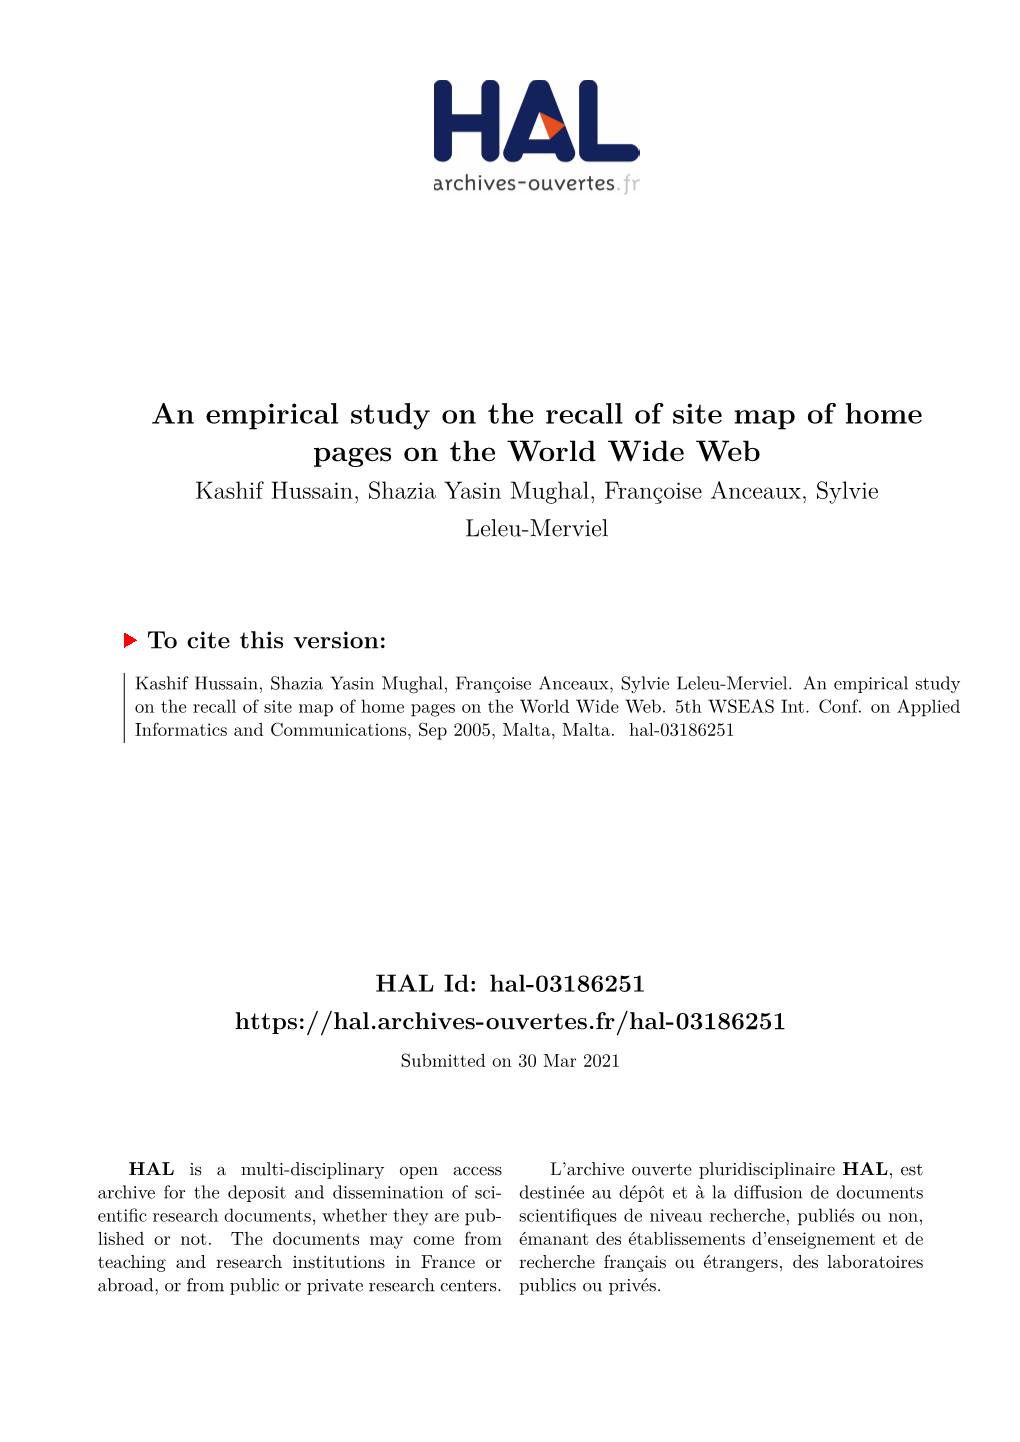 An Empirical Study on the Recall of Site Map of Home Pages on the World Wide Web Kashif Hussain, Shazia Yasin Mughal, Françoise Anceaux, Sylvie Leleu-Merviel